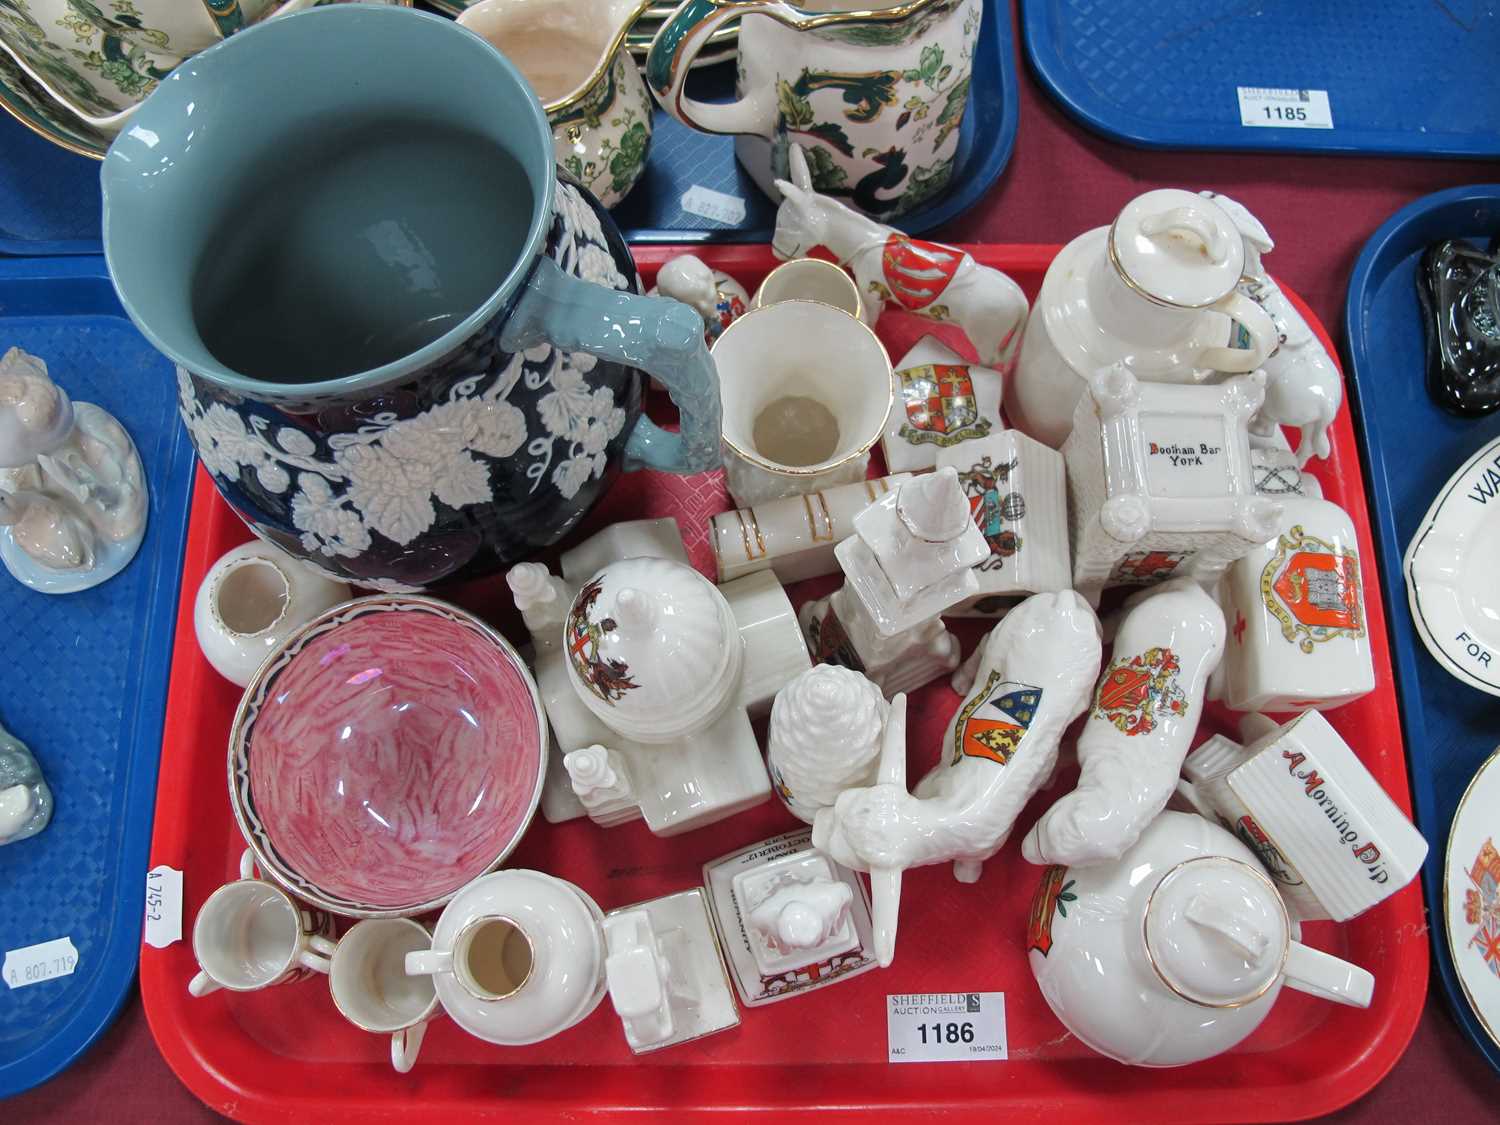 Arcadian Ware, to include dog kennel, ambulance, Boothan Bar York, Copeland Spode jug, Boumier